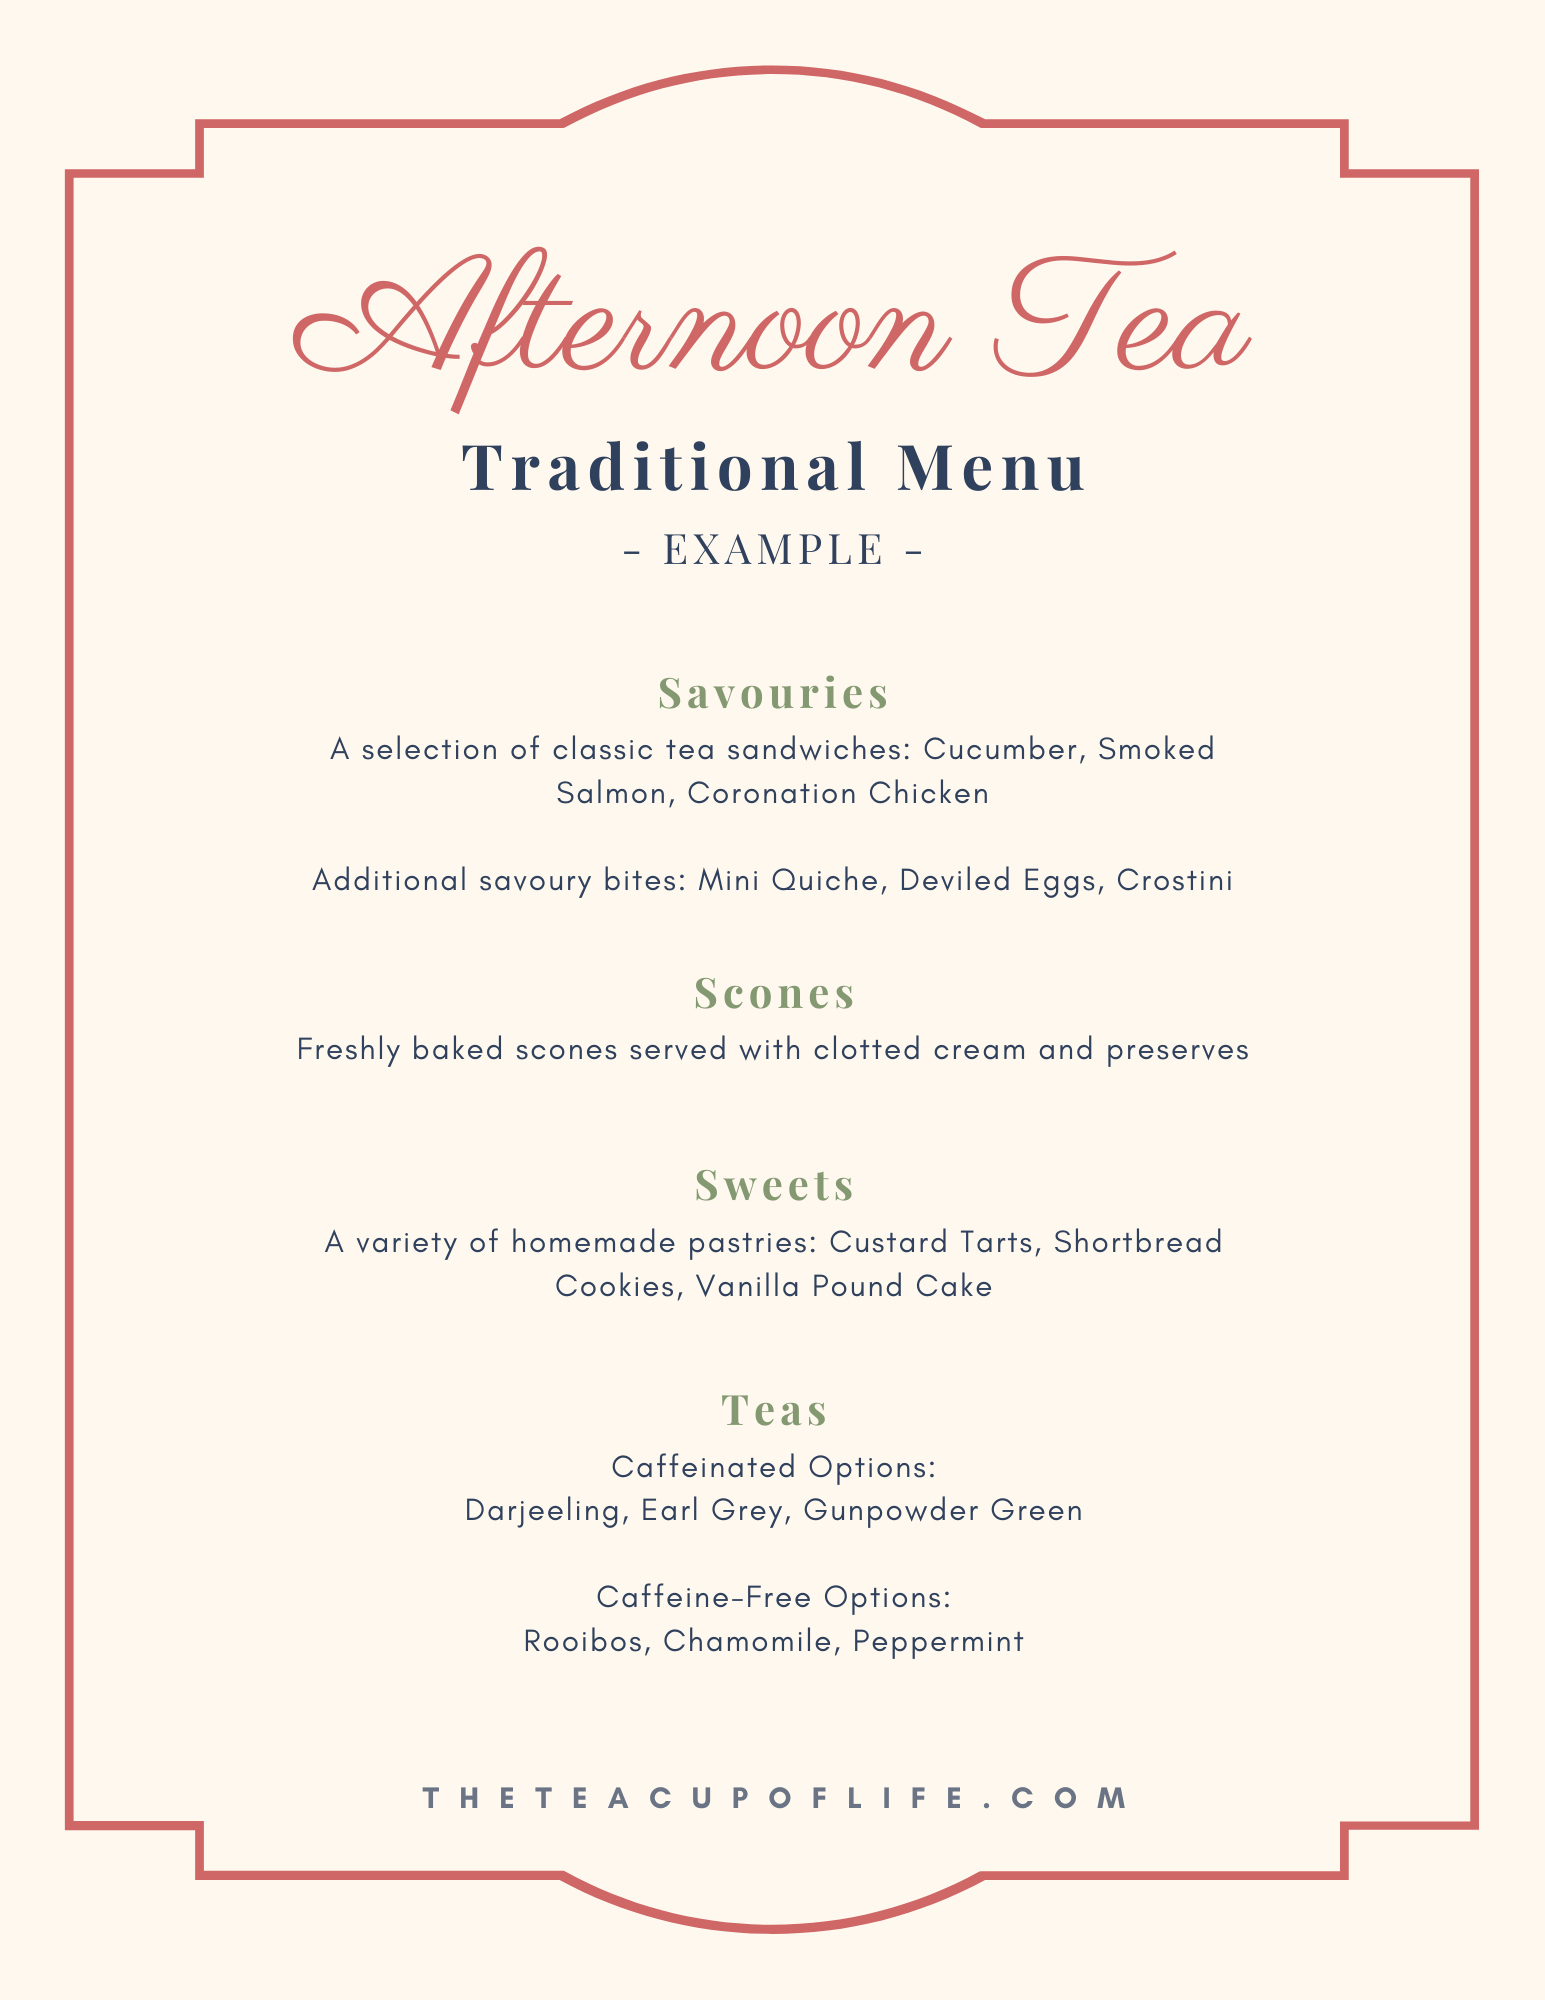 Afternoon Tea Traditional Menu Example The Cup Of Life